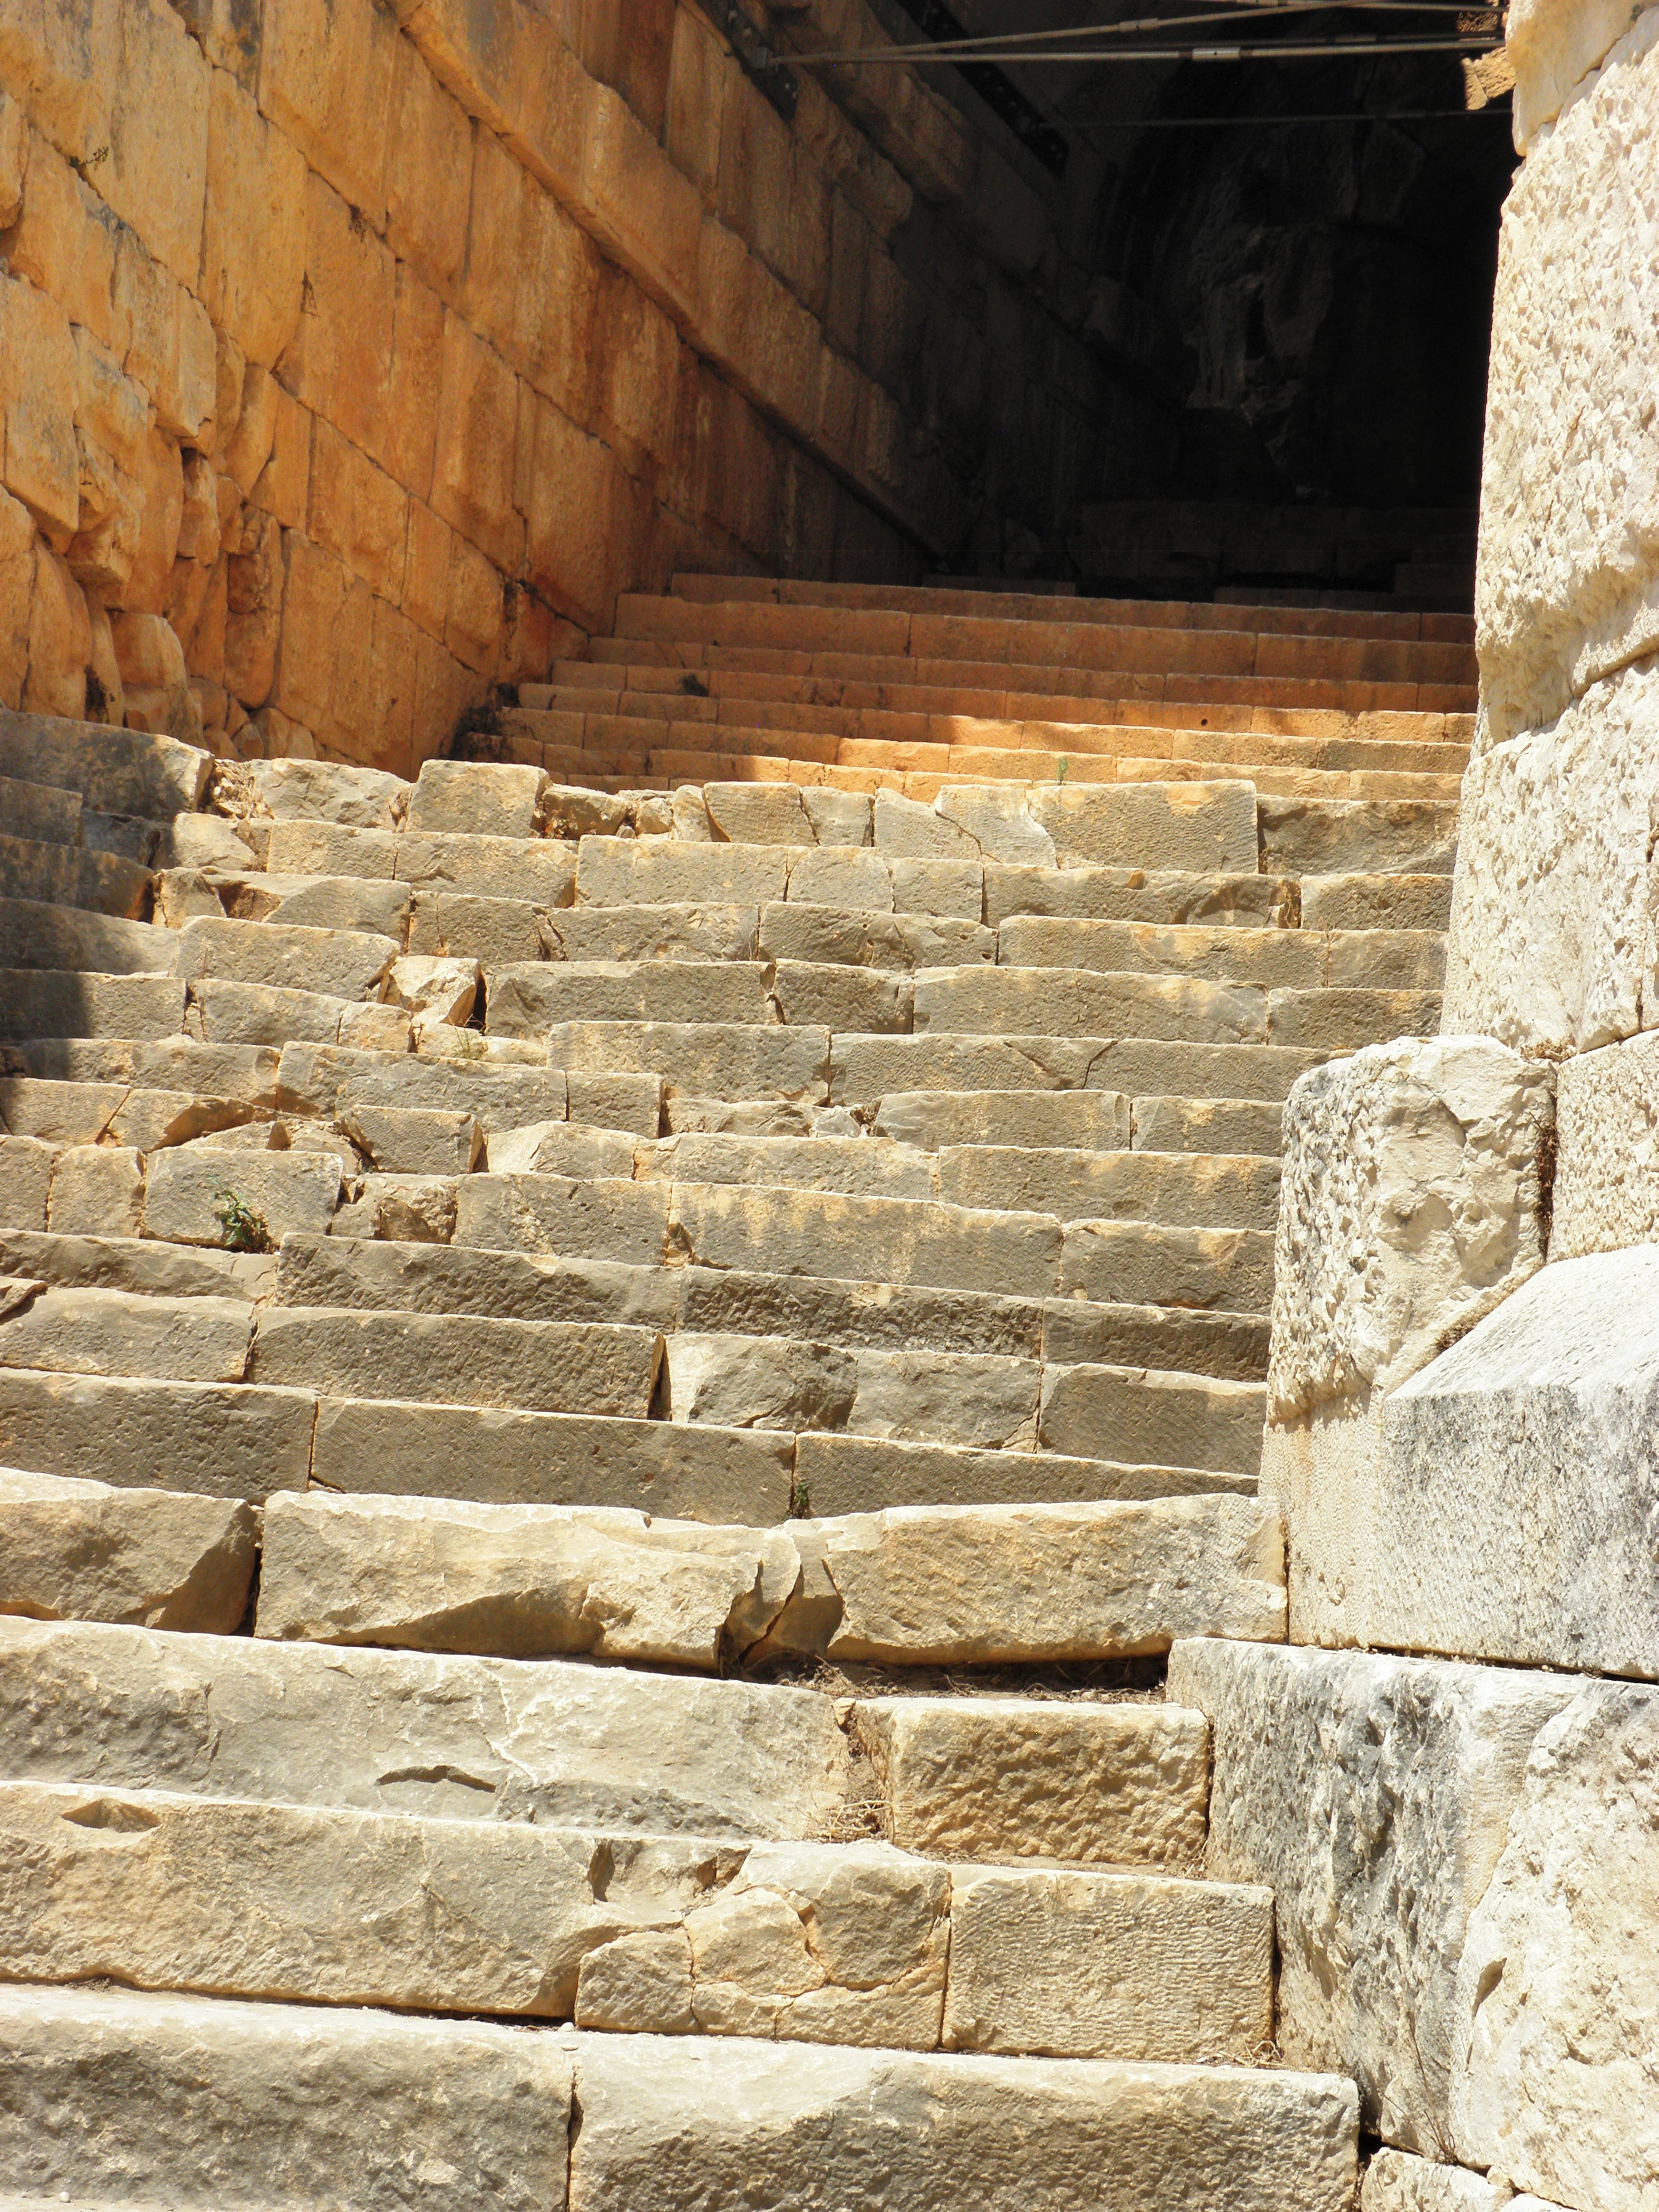 Antique staircase in amphitheater of Myr, Amphitheater, Staircase, Stone, Turkey, HQ Photo